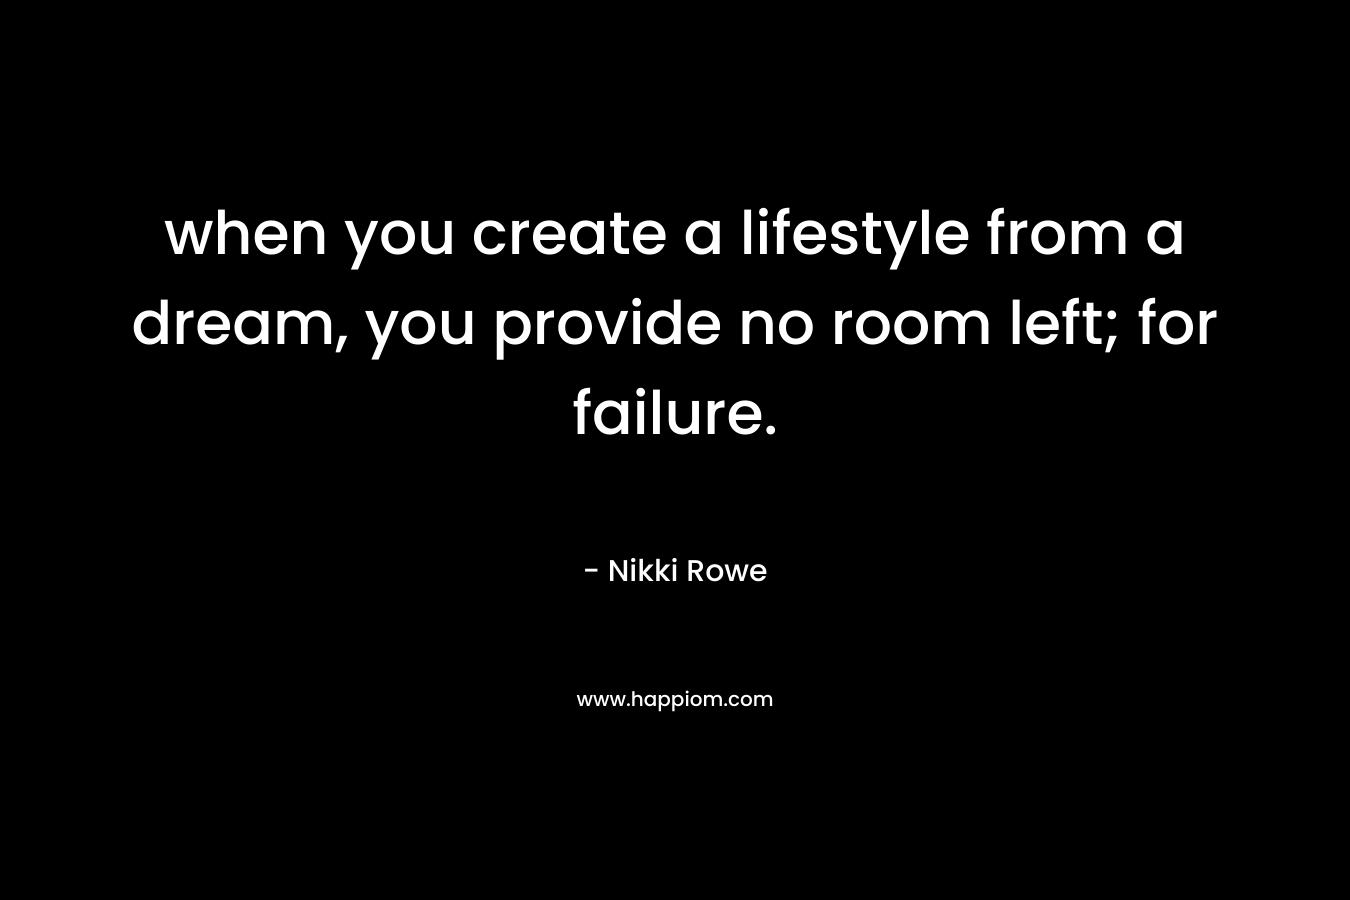 when you create a lifestyle from a dream, you provide no room left; for failure.